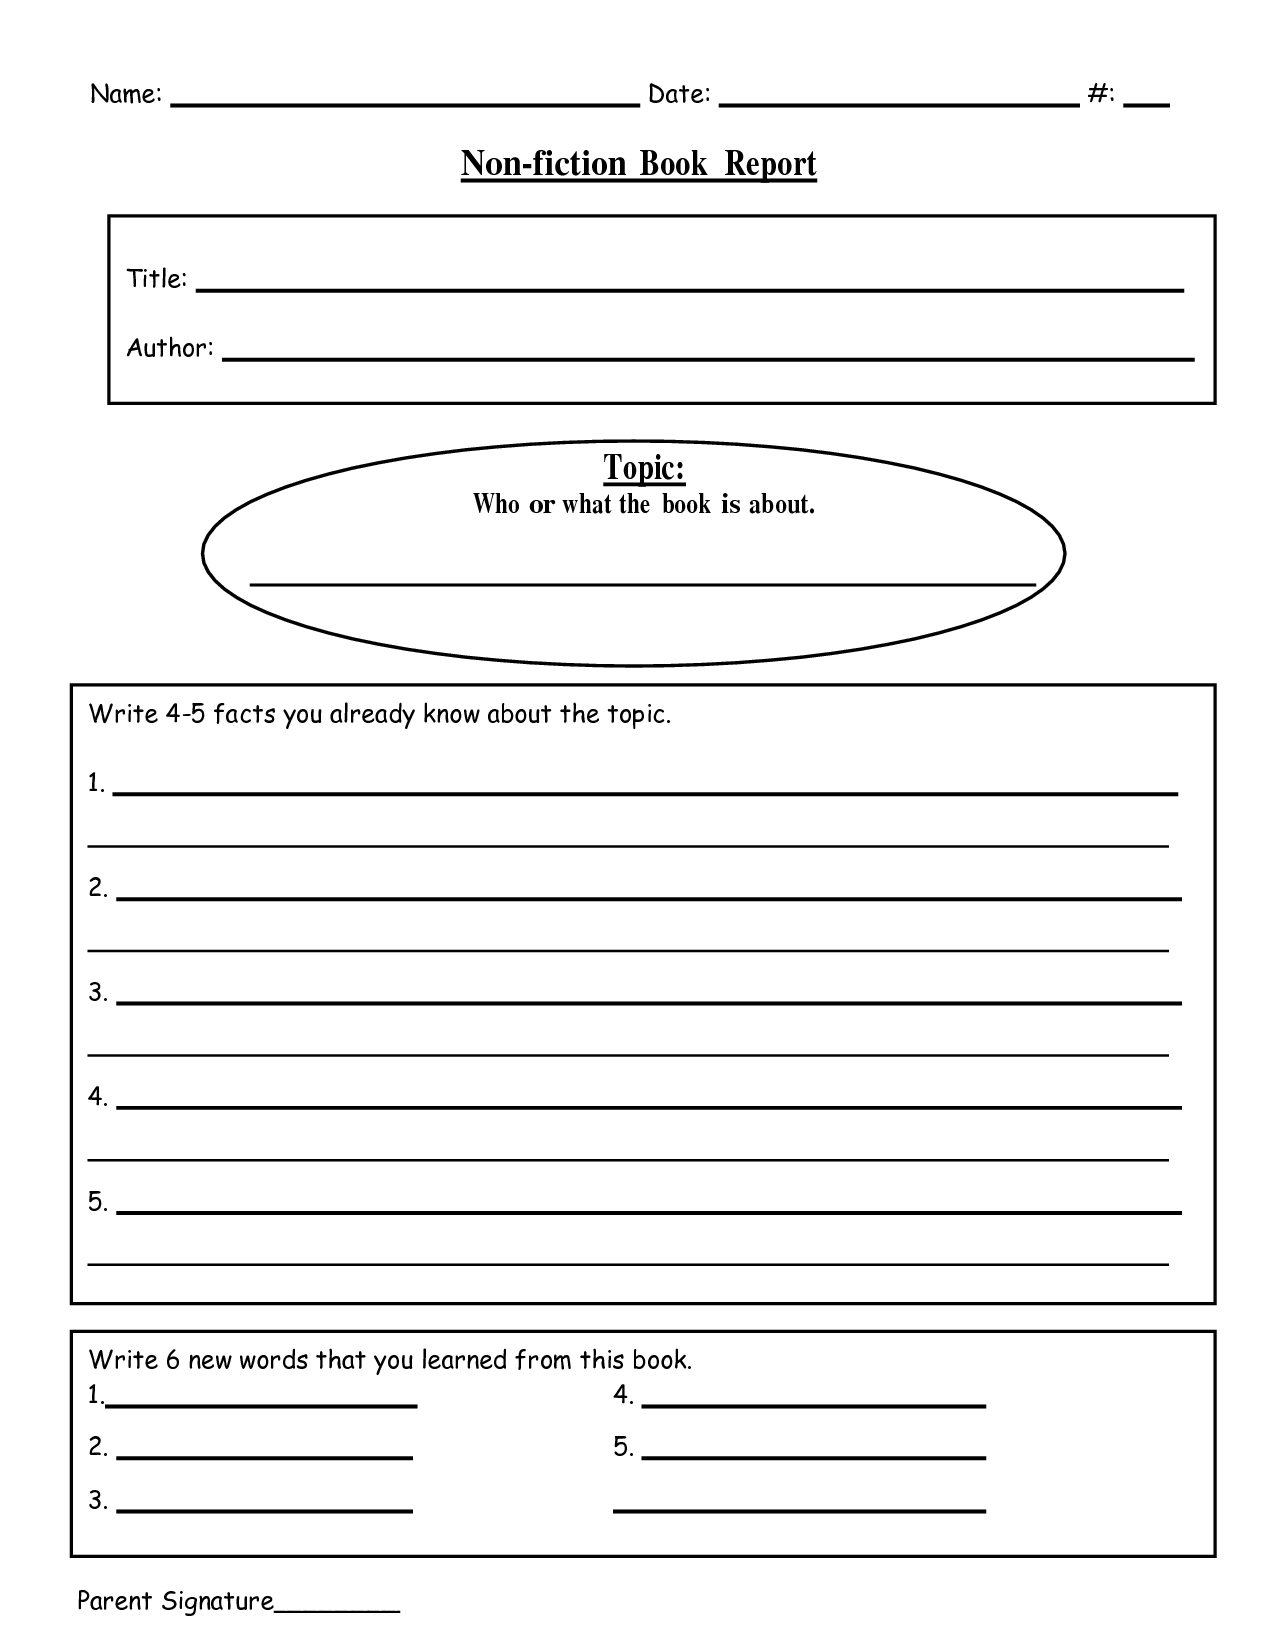 Free Printable Book Report Templates | Non-Fiction Book Report.doc - Free Printable Book Report Forms For Elementary Students